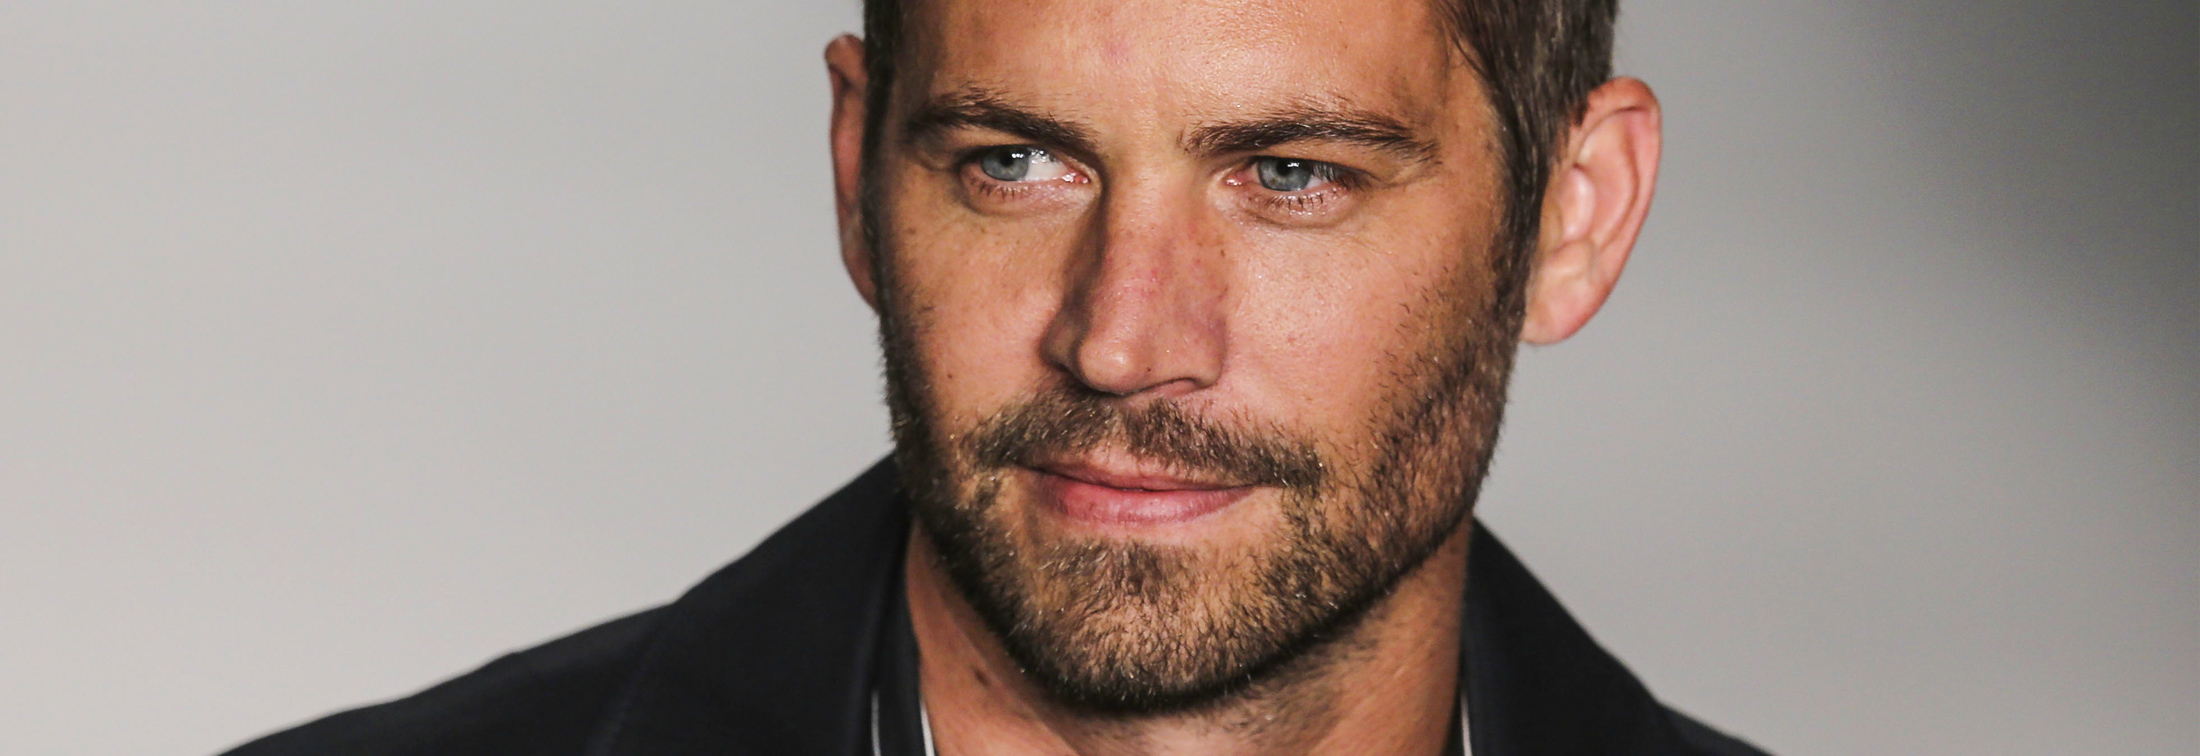 I Am Paul Walker - A loving tribute, but for fans only